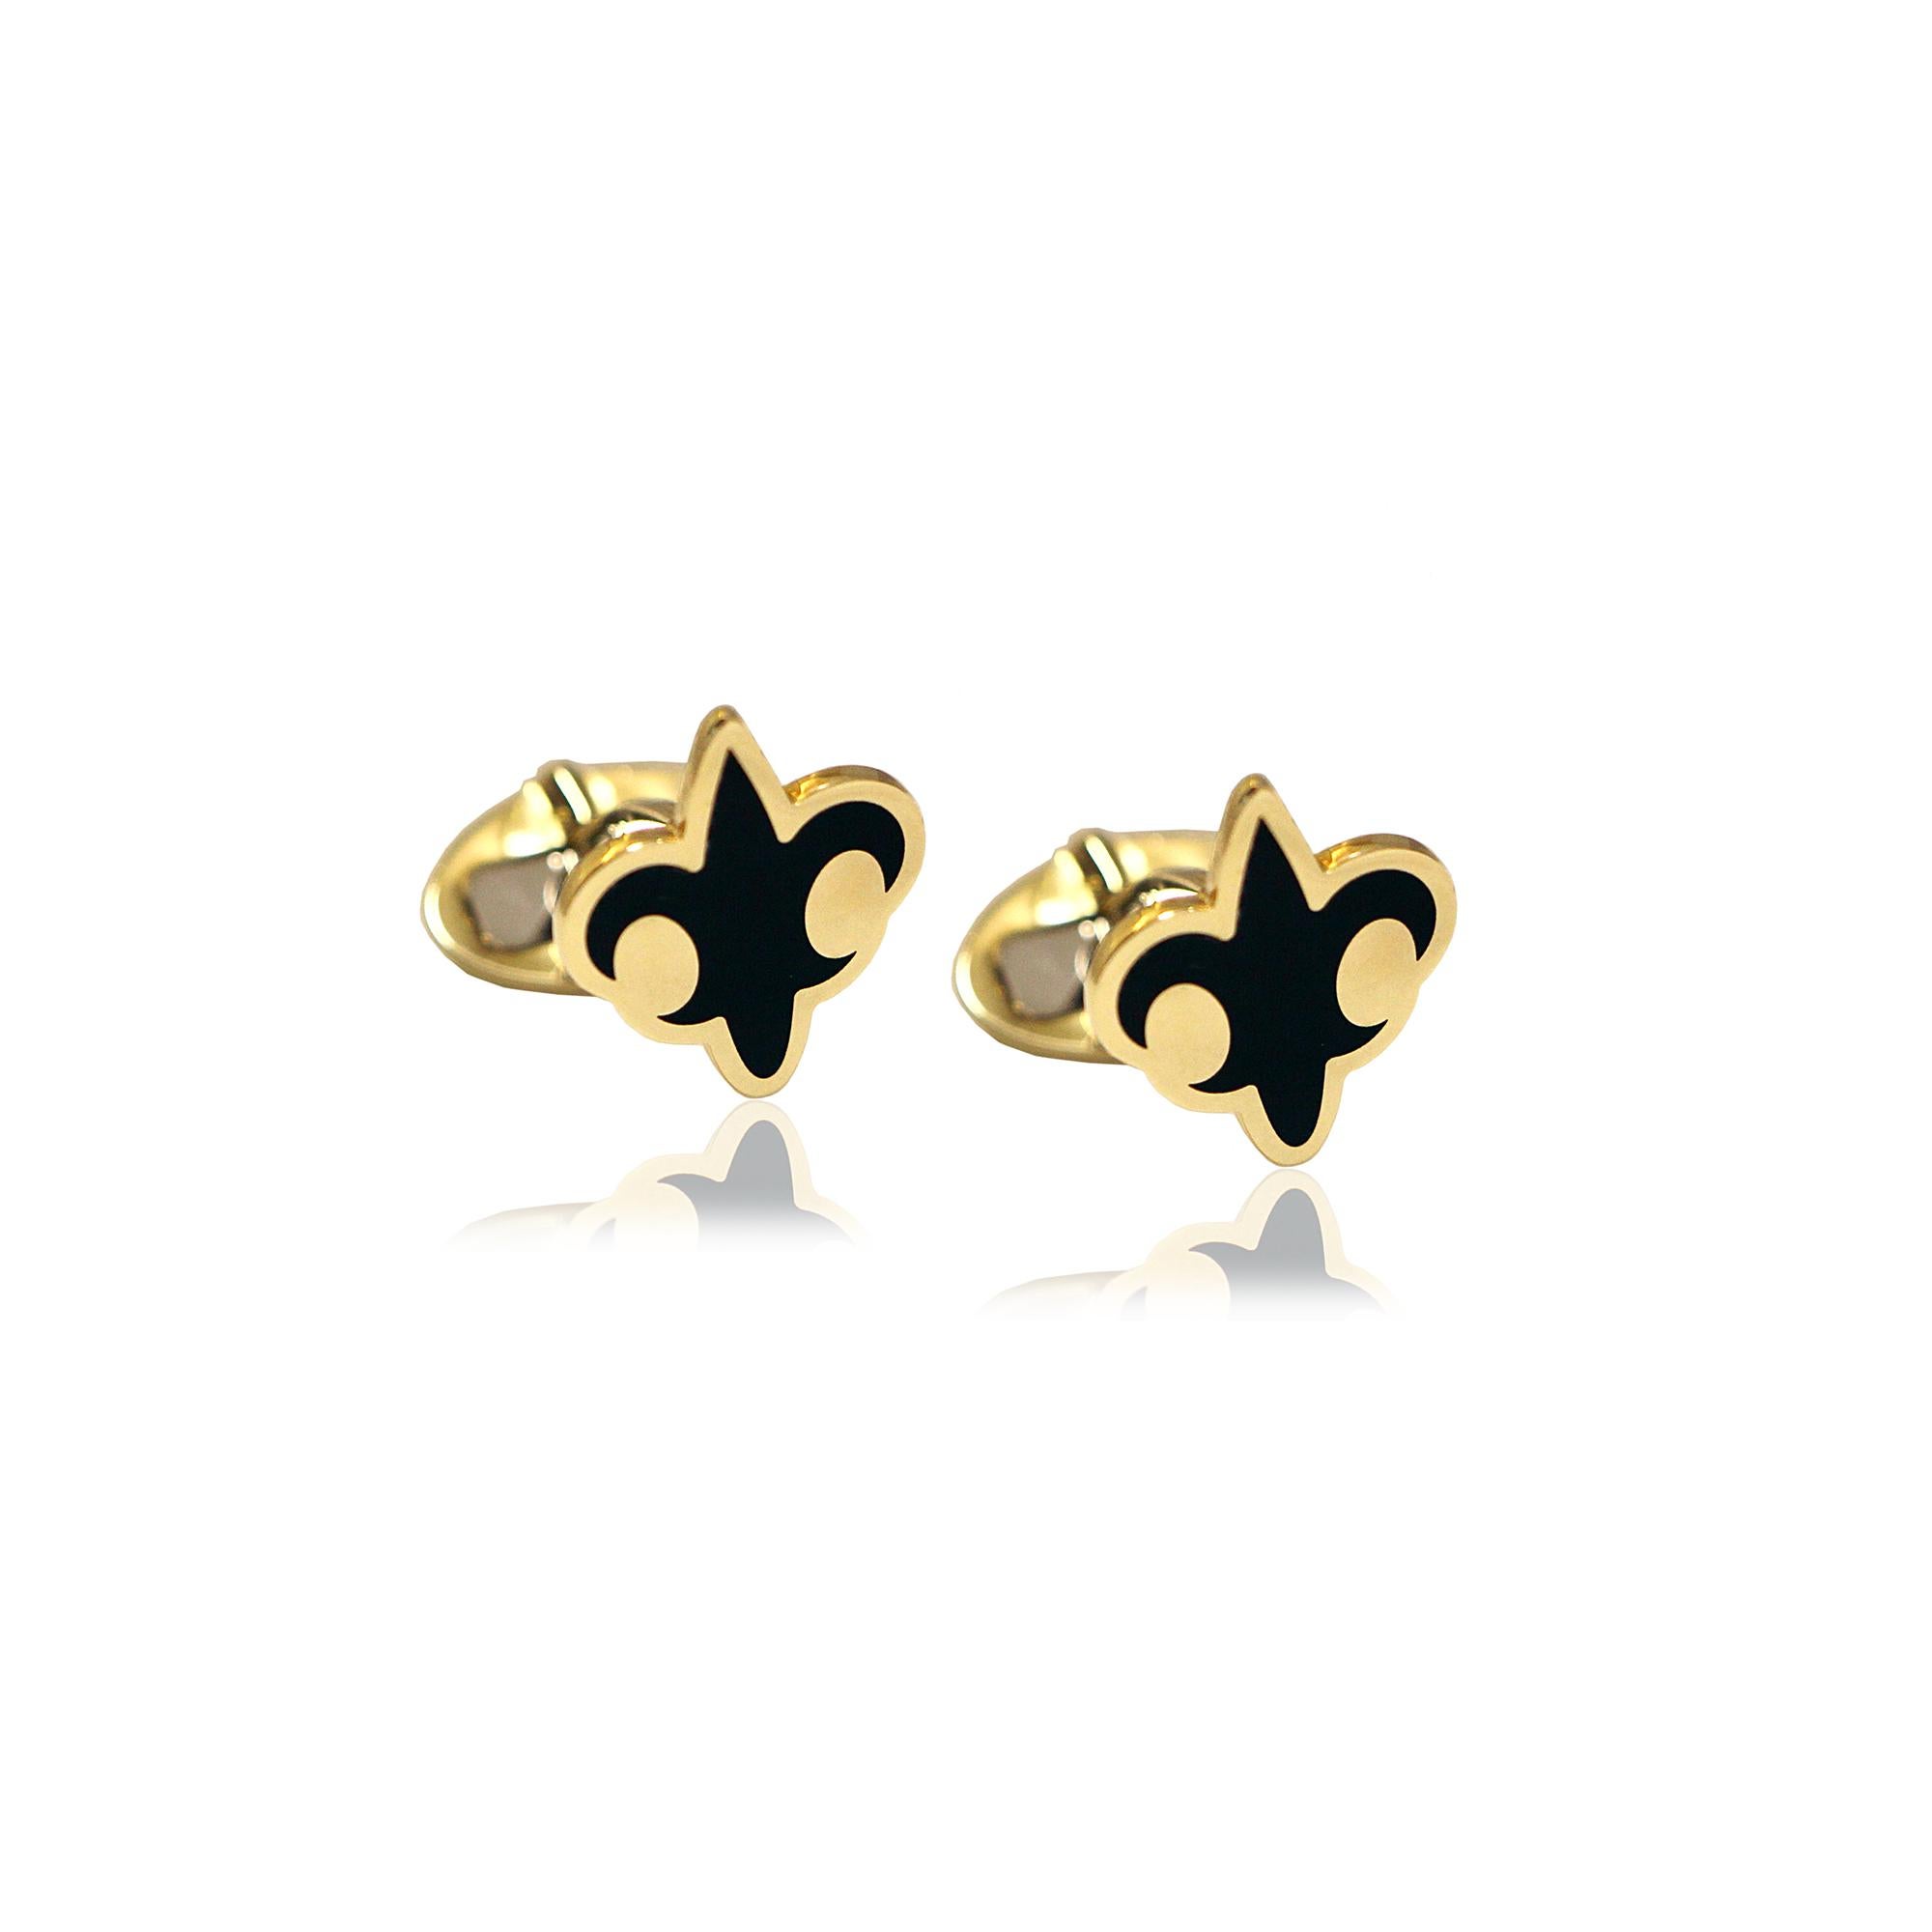 Fleur De Lis shape cufflinks handcrafted in 14Kt yellow gold, featuring a black enameling - cerachrom - centre. The black ceramic and gold combination absorbs and reflects the light all around you. These beautiful cufflinks belong to Metalloplasies